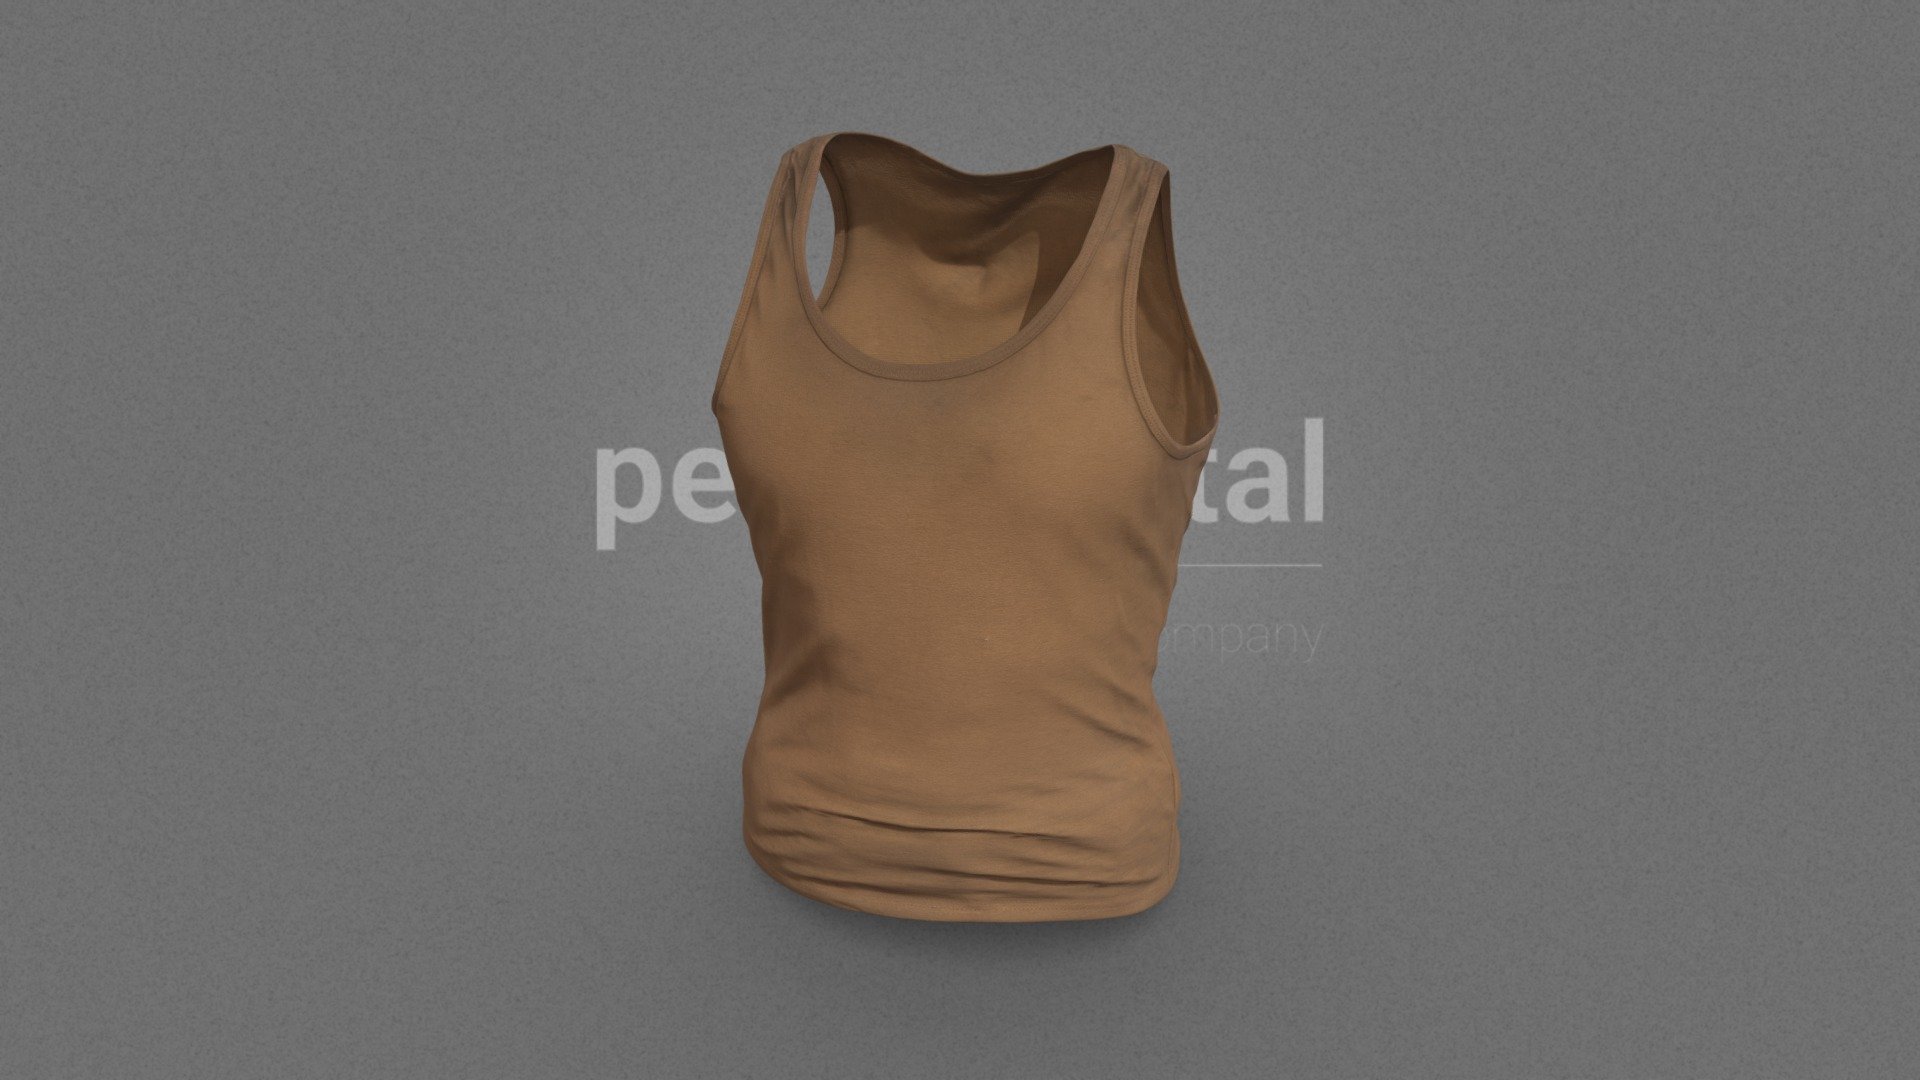 Our Wasteland Garments collection consists of several garments, which you can use in your audiovisual creations, extracted and modeled from our catalog of photogrammetry pieces.

They are optimized for use in 3D scenes of high polygonalization and optimized for rendering. We do not include characters, but they are positioned for you to include and adjust your own character. They have a model LOW (_LODRIG) inside the Blender file (included in the AdditionalFiles), which you can use for vertex weighting or cloth simulation and thus, make the transfer of vertices or property masks from the LOW to the HIGH** model.

We have included the texture maps in high resolution, as well as the Displacement maps, so you can make extreme point of view with your 3D cameras, as well as the Blender file so you can edit any aspect of the set.

Enjoy it.

Web: https://peris.digital/ - Wasteland Garments Series- Model 08 Tank Top - 3D model by Peris Digital (@perisdigital) 3d model